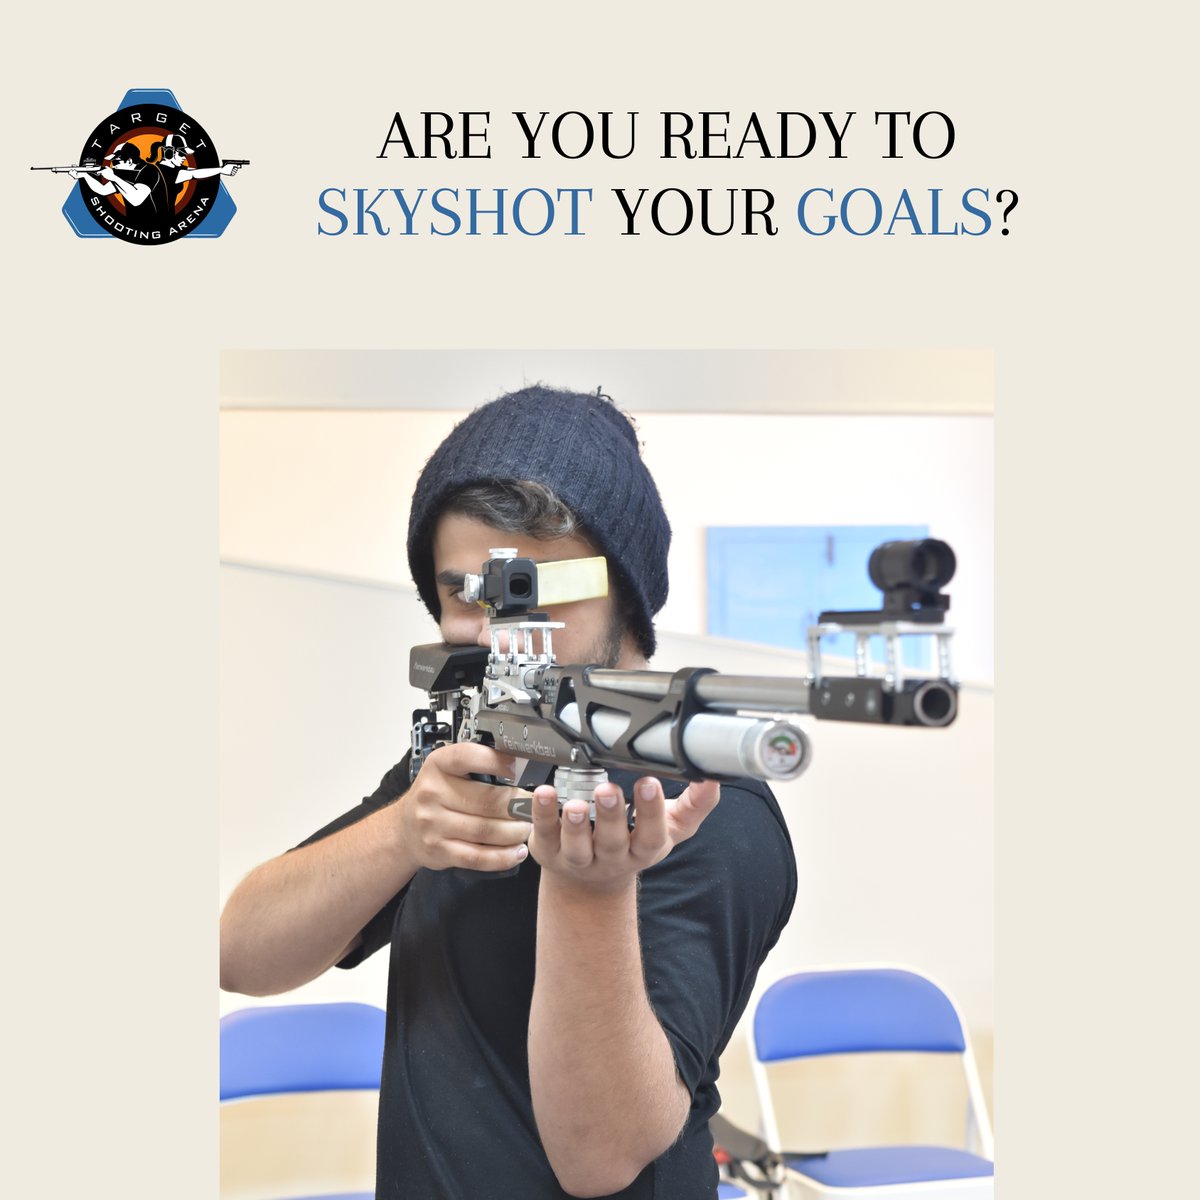 Personalized training, live gameplay analysis, and exclusive tools await. Join our community and dominate the battlefield. Boost your gaming goals with Target Shooting Arena! #targetshootingarena #goals #gaming #shootingrange #joinus #getready #comingsoon #chandigarh #mohali